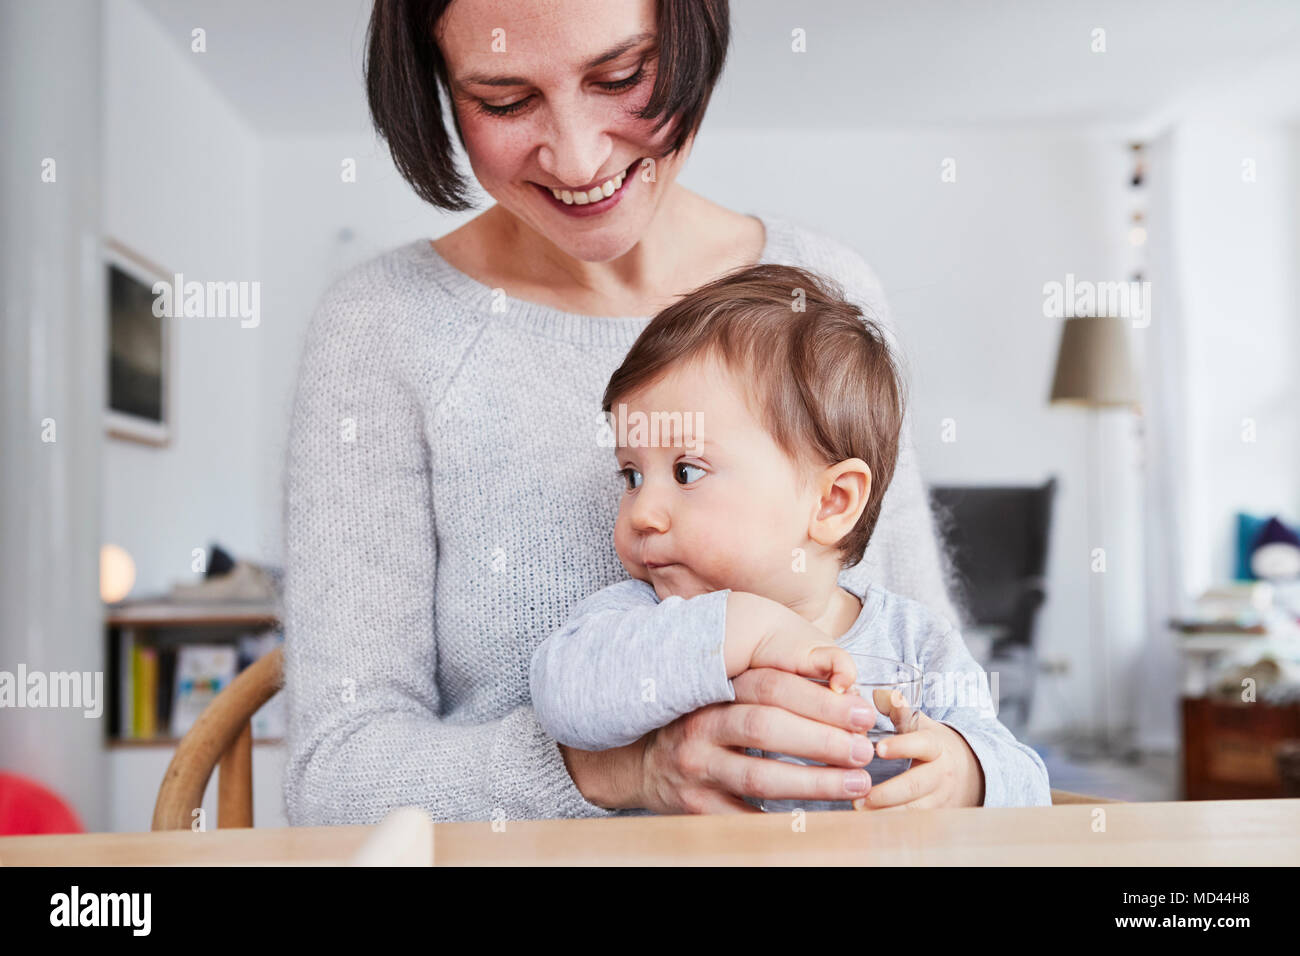 Portrait of woman sitting at table with baby daughter Stock Photo